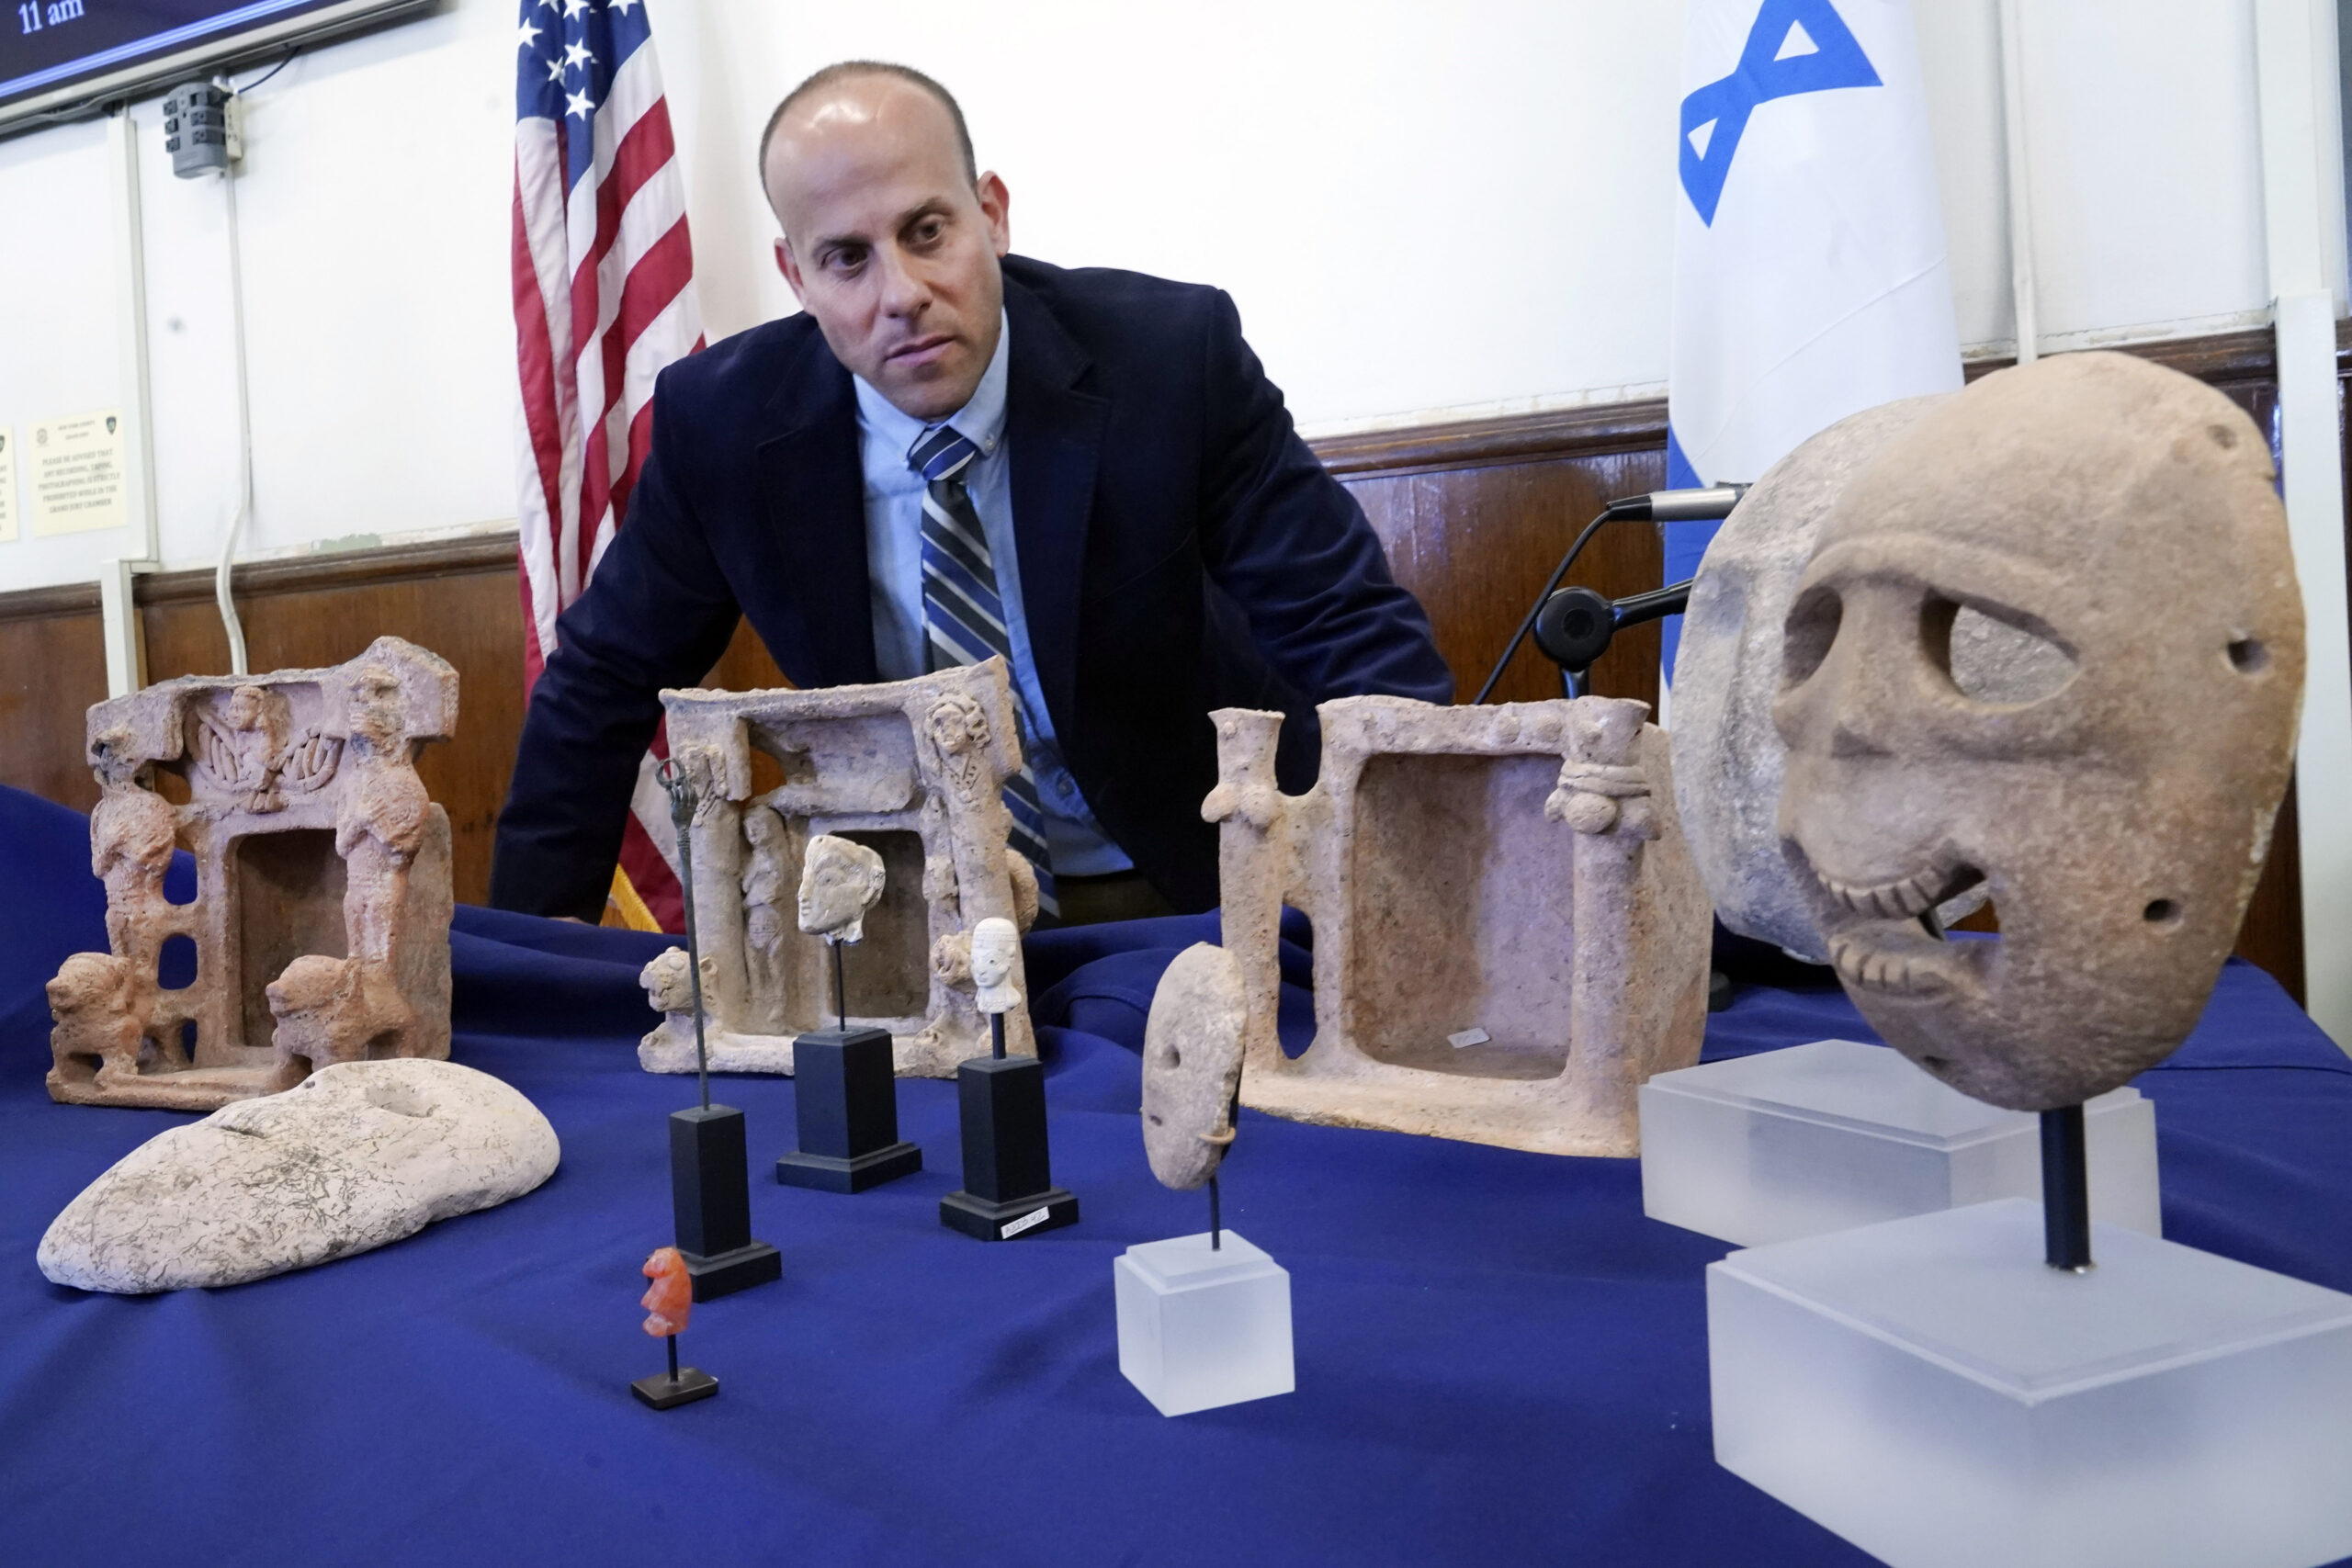 Dr. Etan Klein, Deputy Director of the Theft Prevention Unit, of Israel's Antiquities Authority, looks over looted antiquities worth $5-million, seized from billionaire hedge fund manager Michael Steinhardt, displayed in the offices of the Manhattan District Attorney, in New York, Tuesday, March 22, 2022. The 39 items being returned to Israel include two gold masks dating from about 5000 B.C. that are valued at $500,000, and a set of three death masks that date from 6000 to 7000 B.C. and are worth a total of $650,000, (AP Photo/Richard Drew)